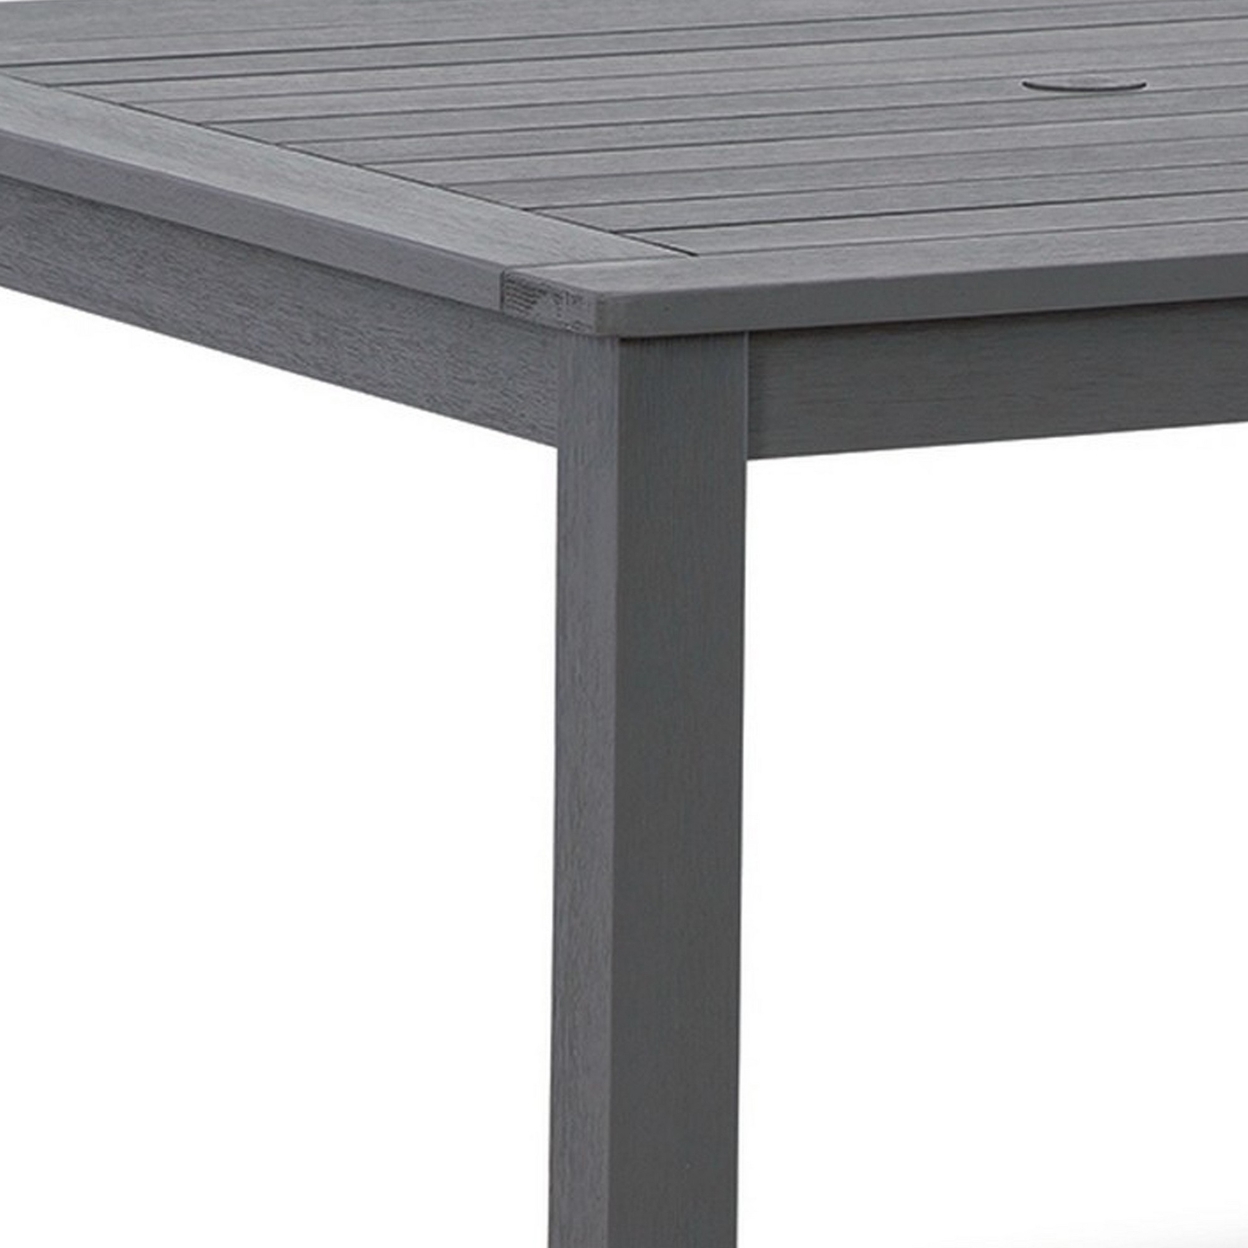 42 Inch Outdoor Square Dining Table, Planked Top, Gray Wood, Straight Legs